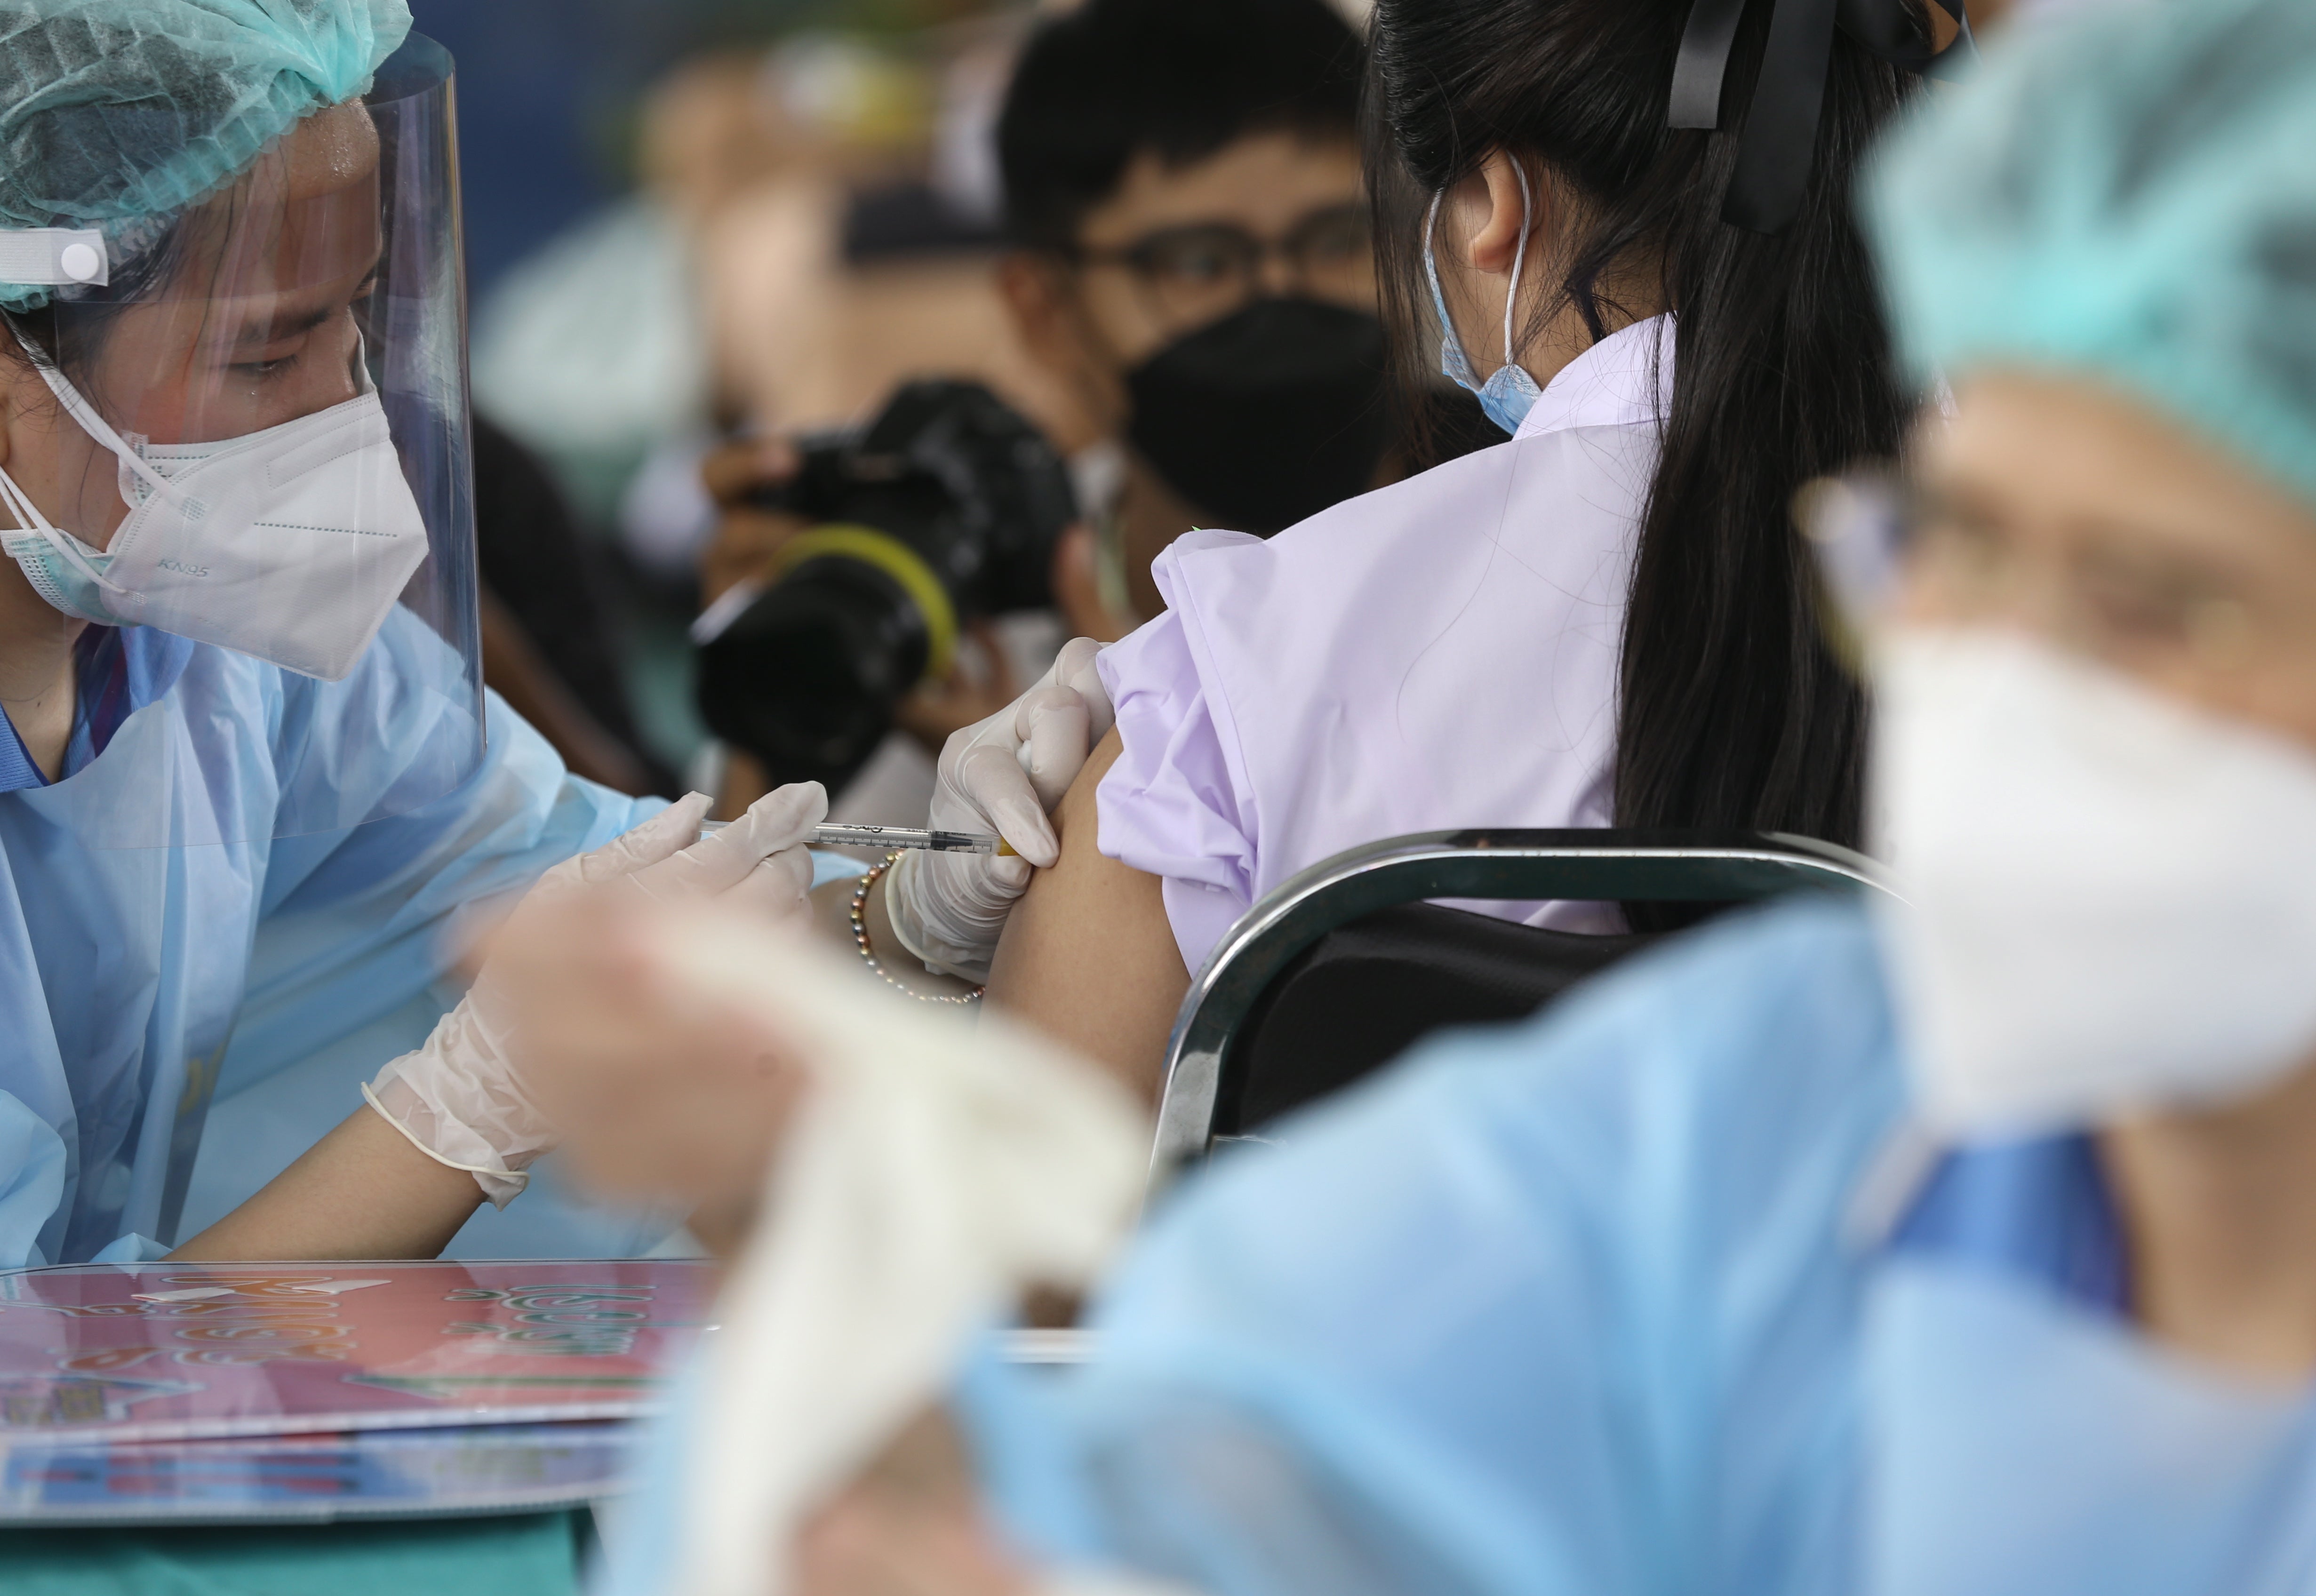 A health official administers a dose of the Pfizer vaccine to a student during the initiation of a Covid-19 vaccination drive for students at Pibool Uppatham school, in Bangkok, Thailand on 4 October 2021